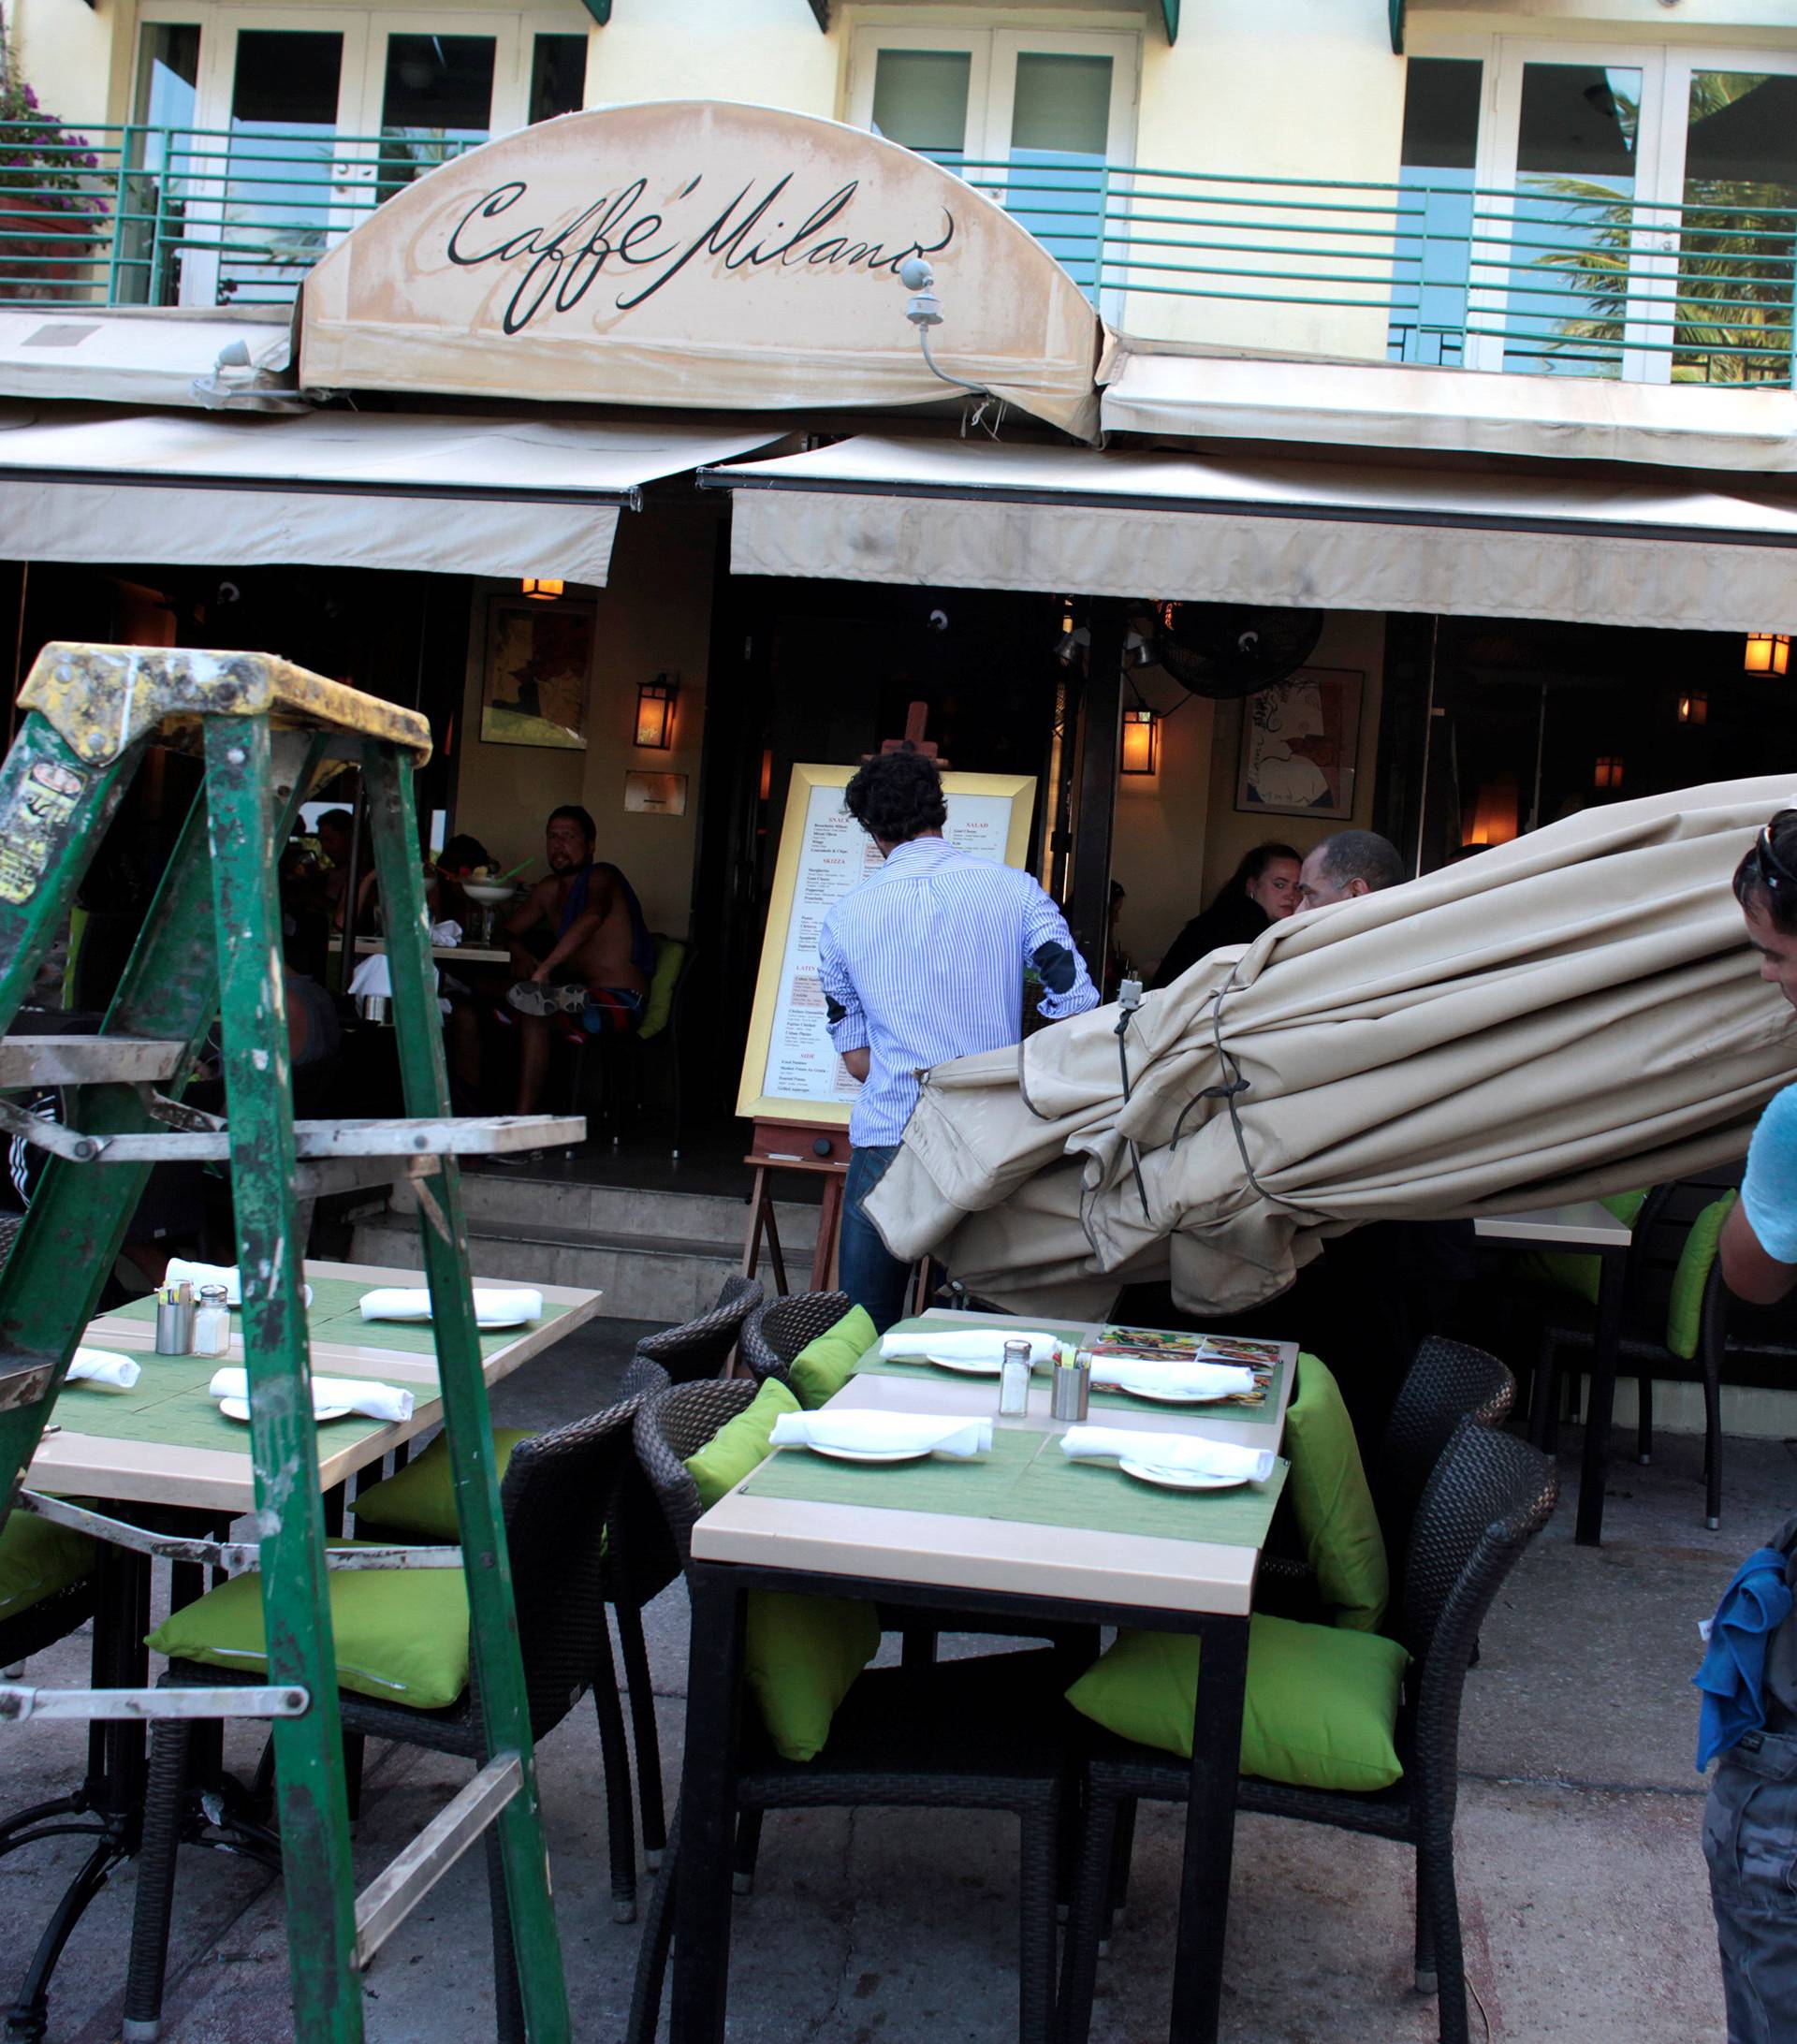 Workers remove umbrellas at Caffe Milano in anticipation of Hurricane Matthew in South Beach